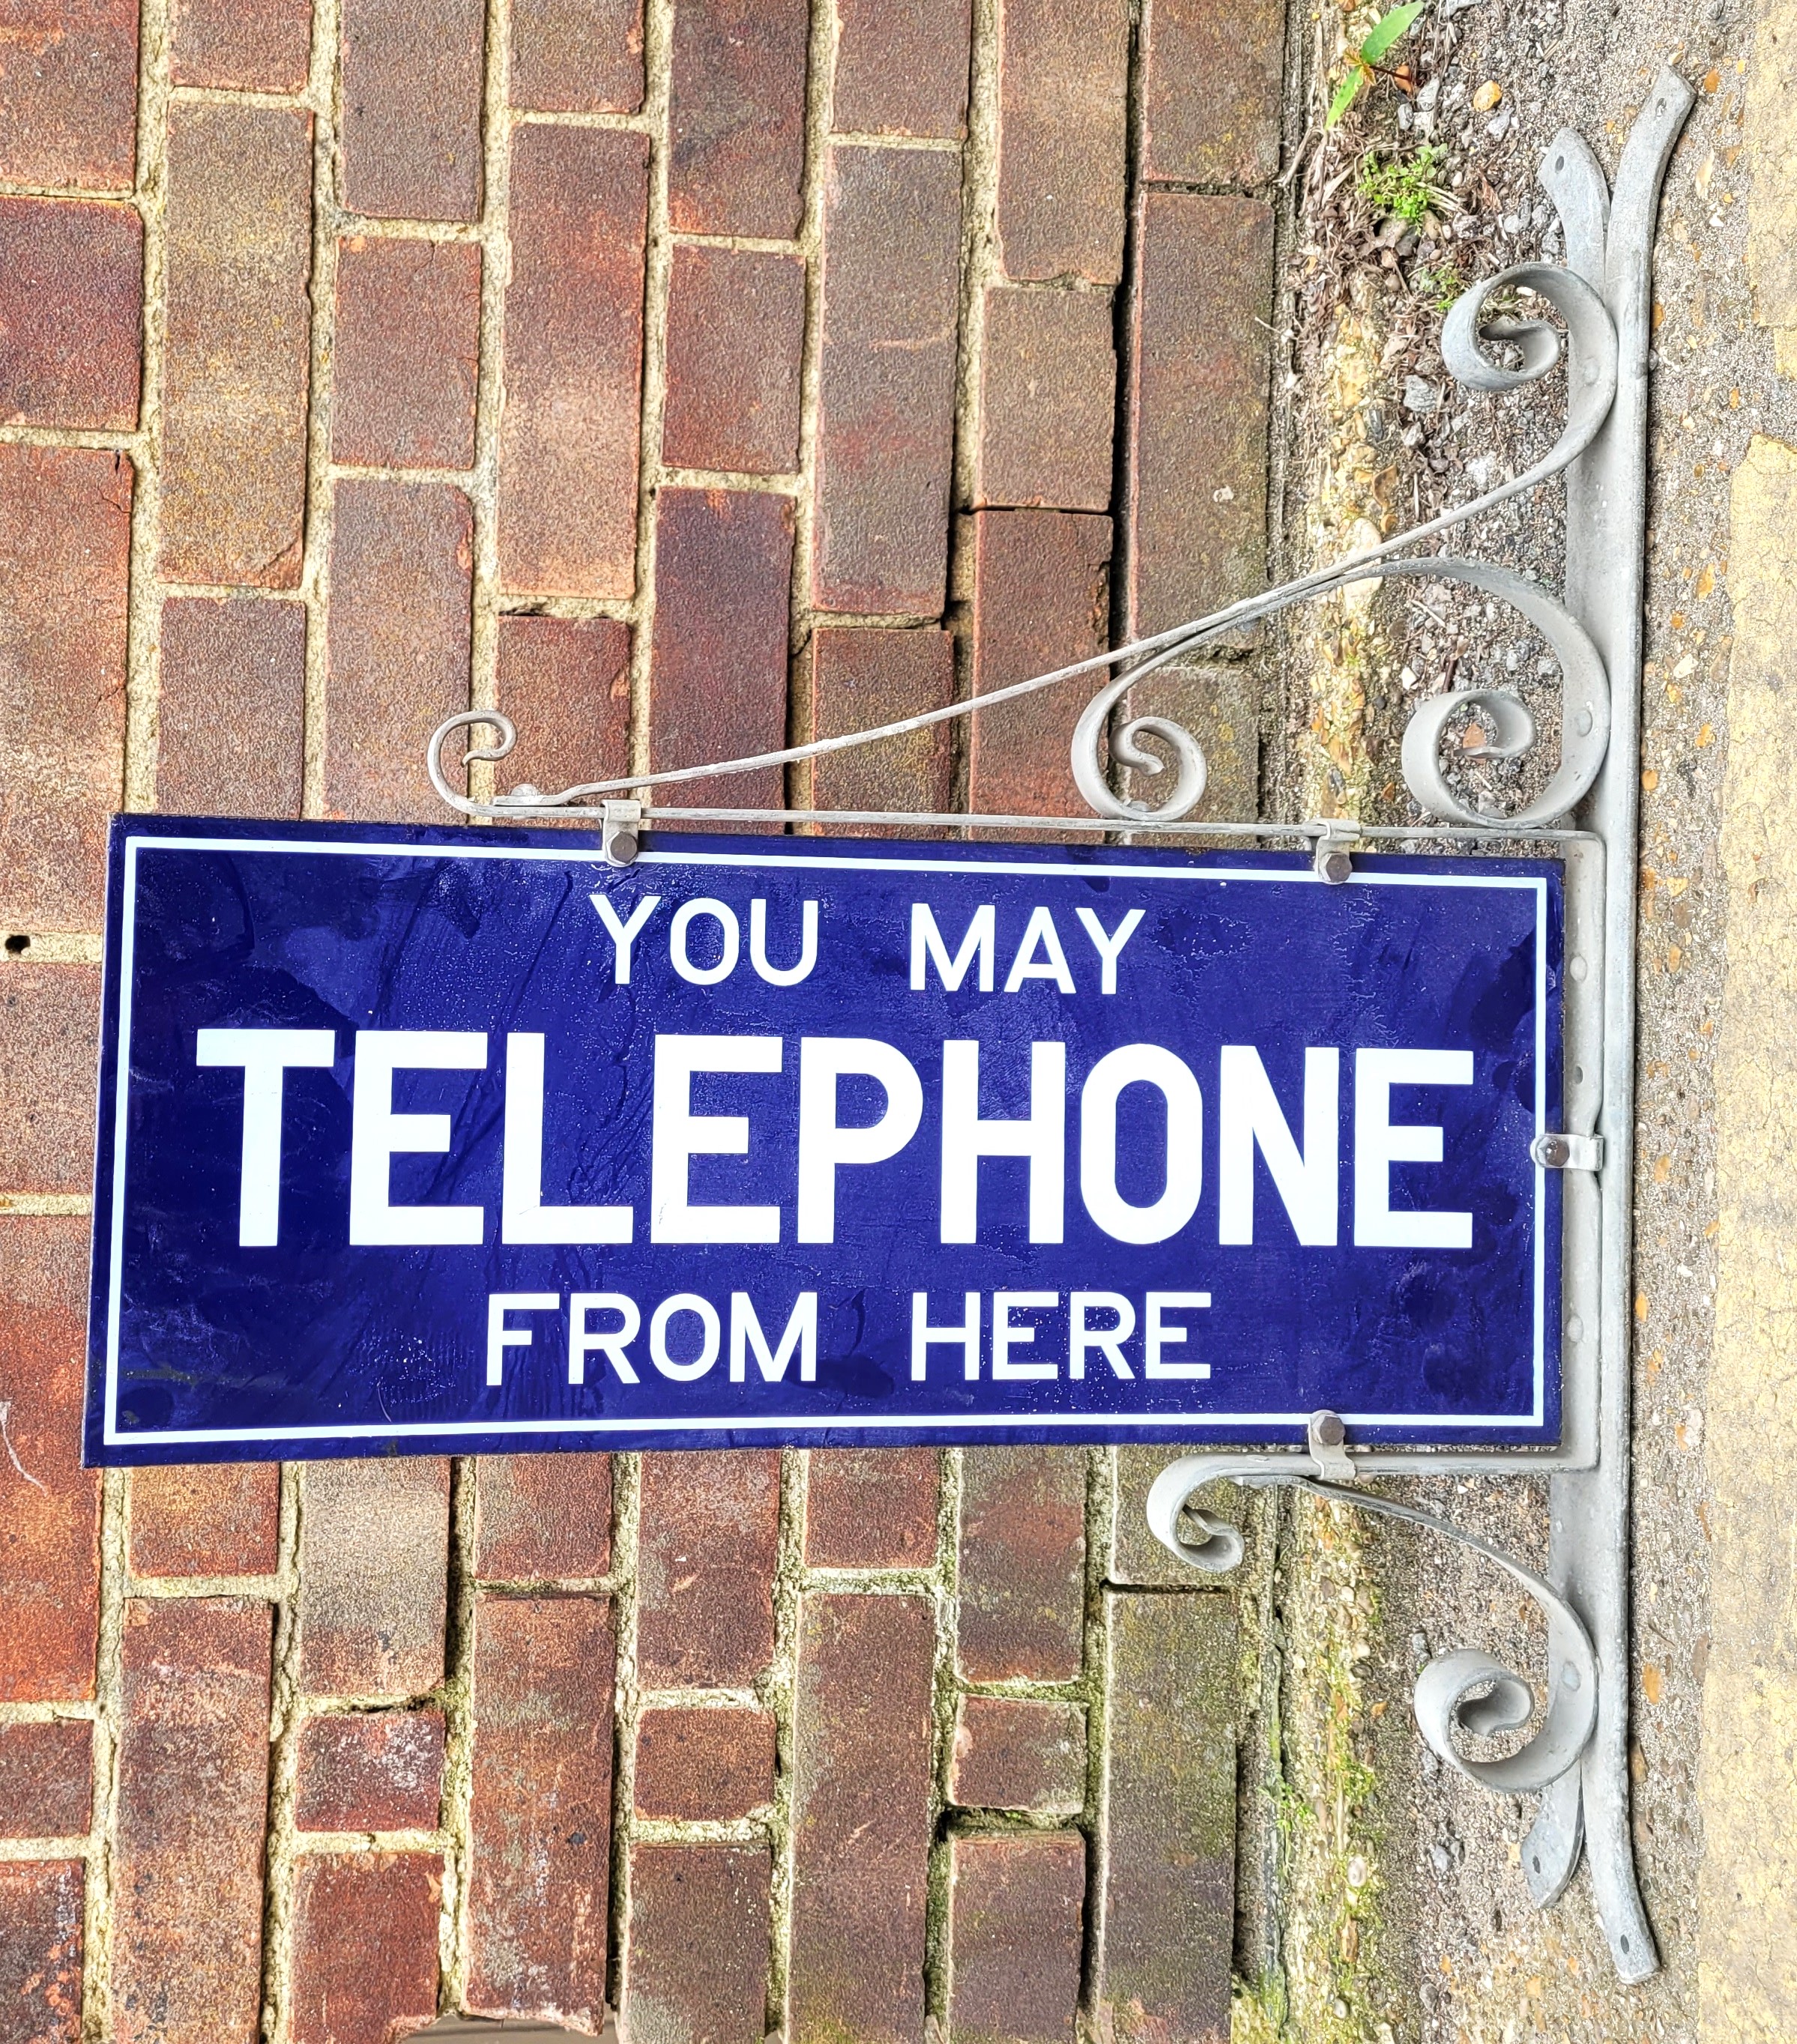 "You May Telephone From Here", an original double sided enamelled sign, 23cm x 55.8cm, with